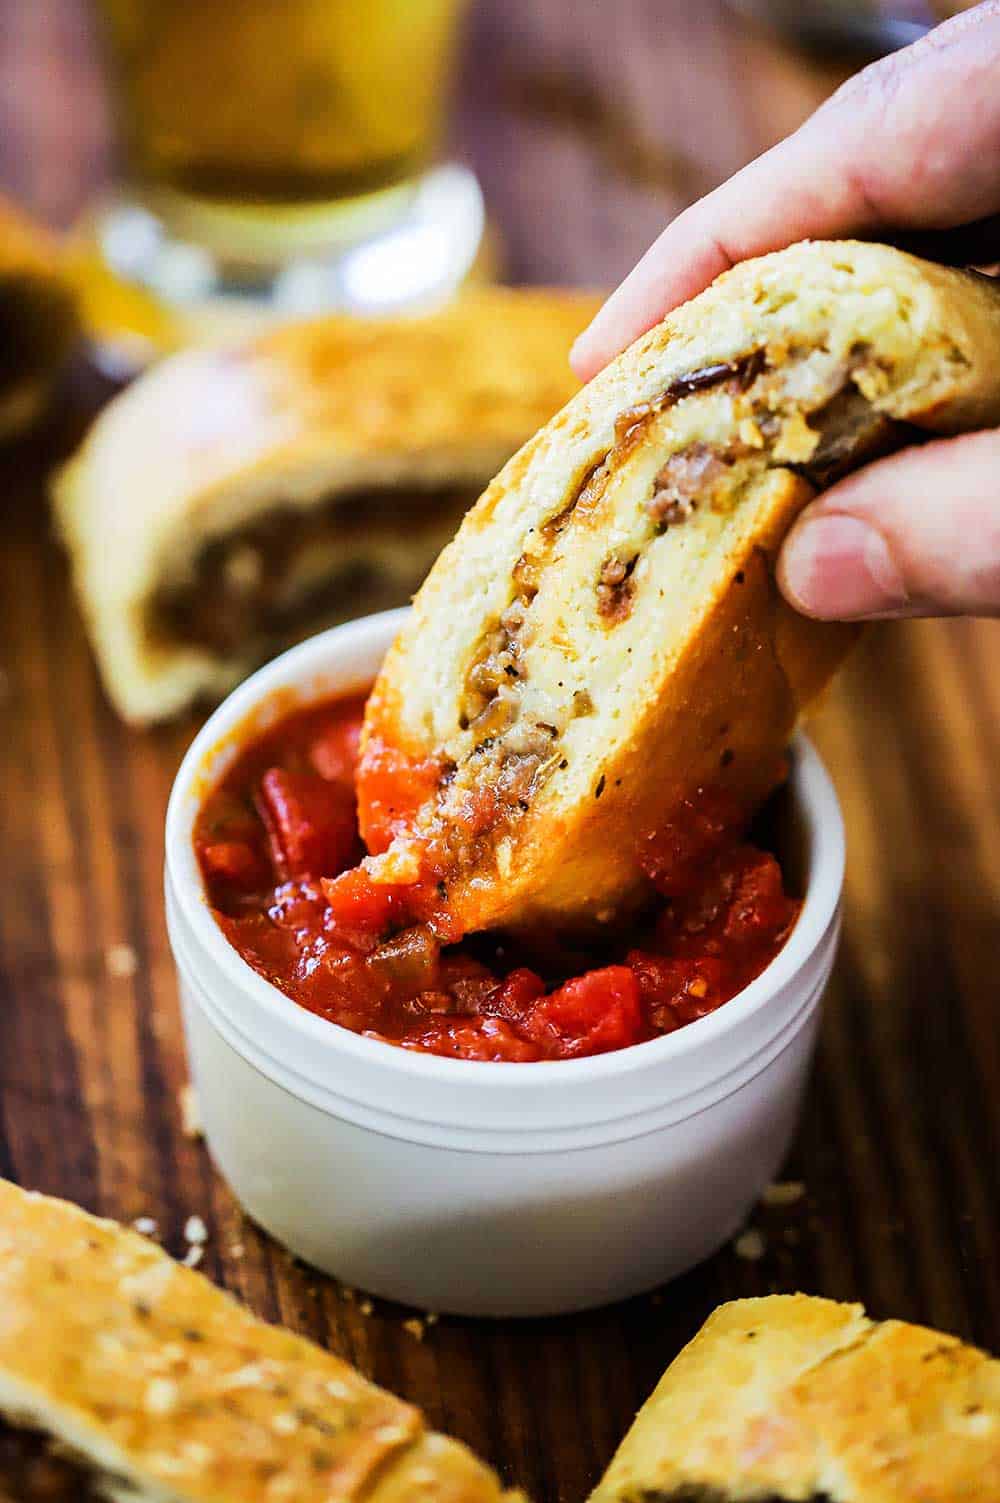 A person dipping a slice of sausage into a small white bowl of marinara sauce.